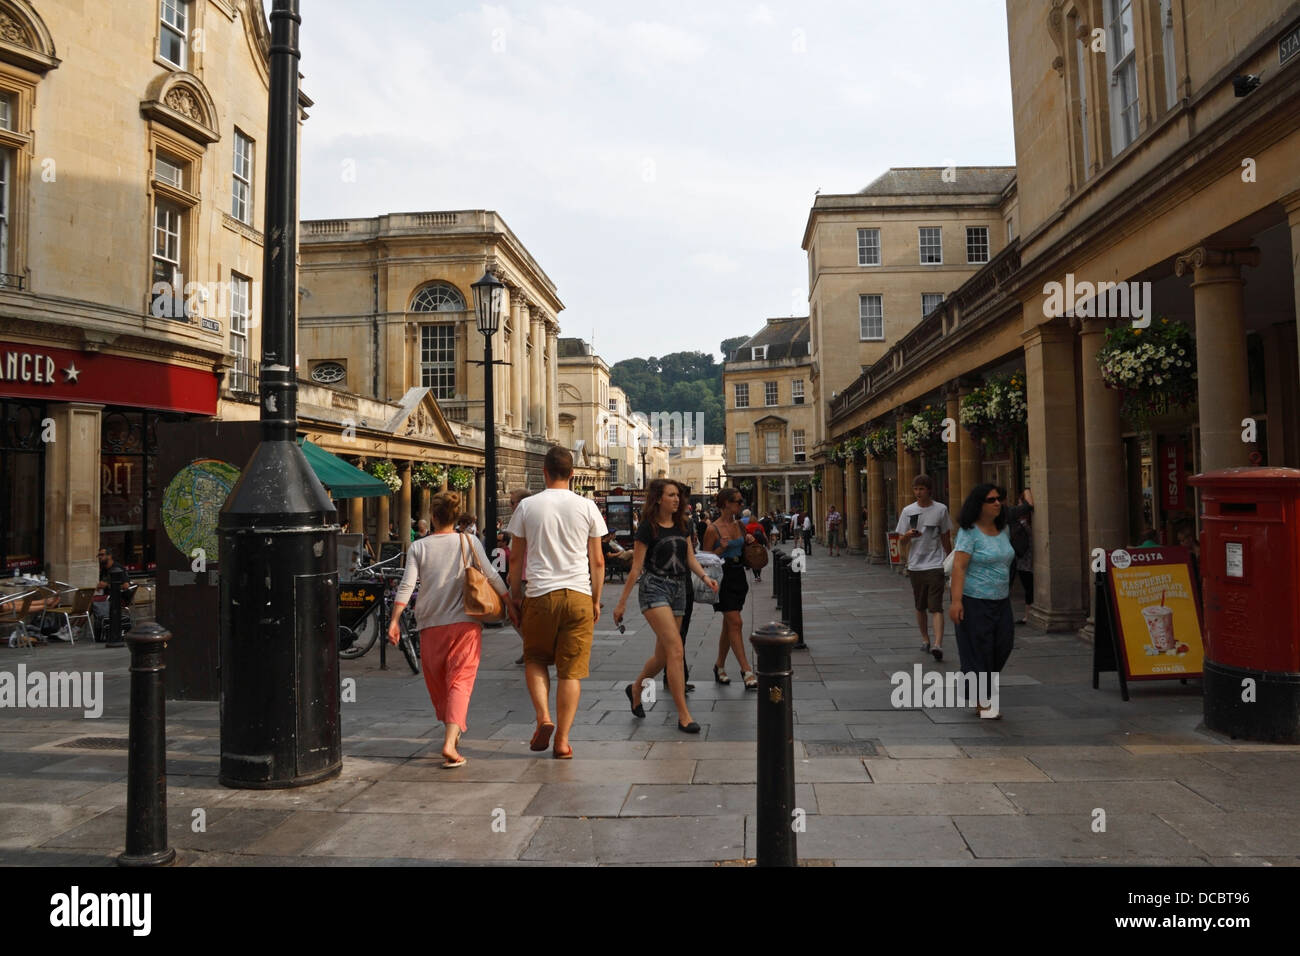 Shoppers Tourists walking in Bath city centre, England UK, English town centre streetscene Stock Photo